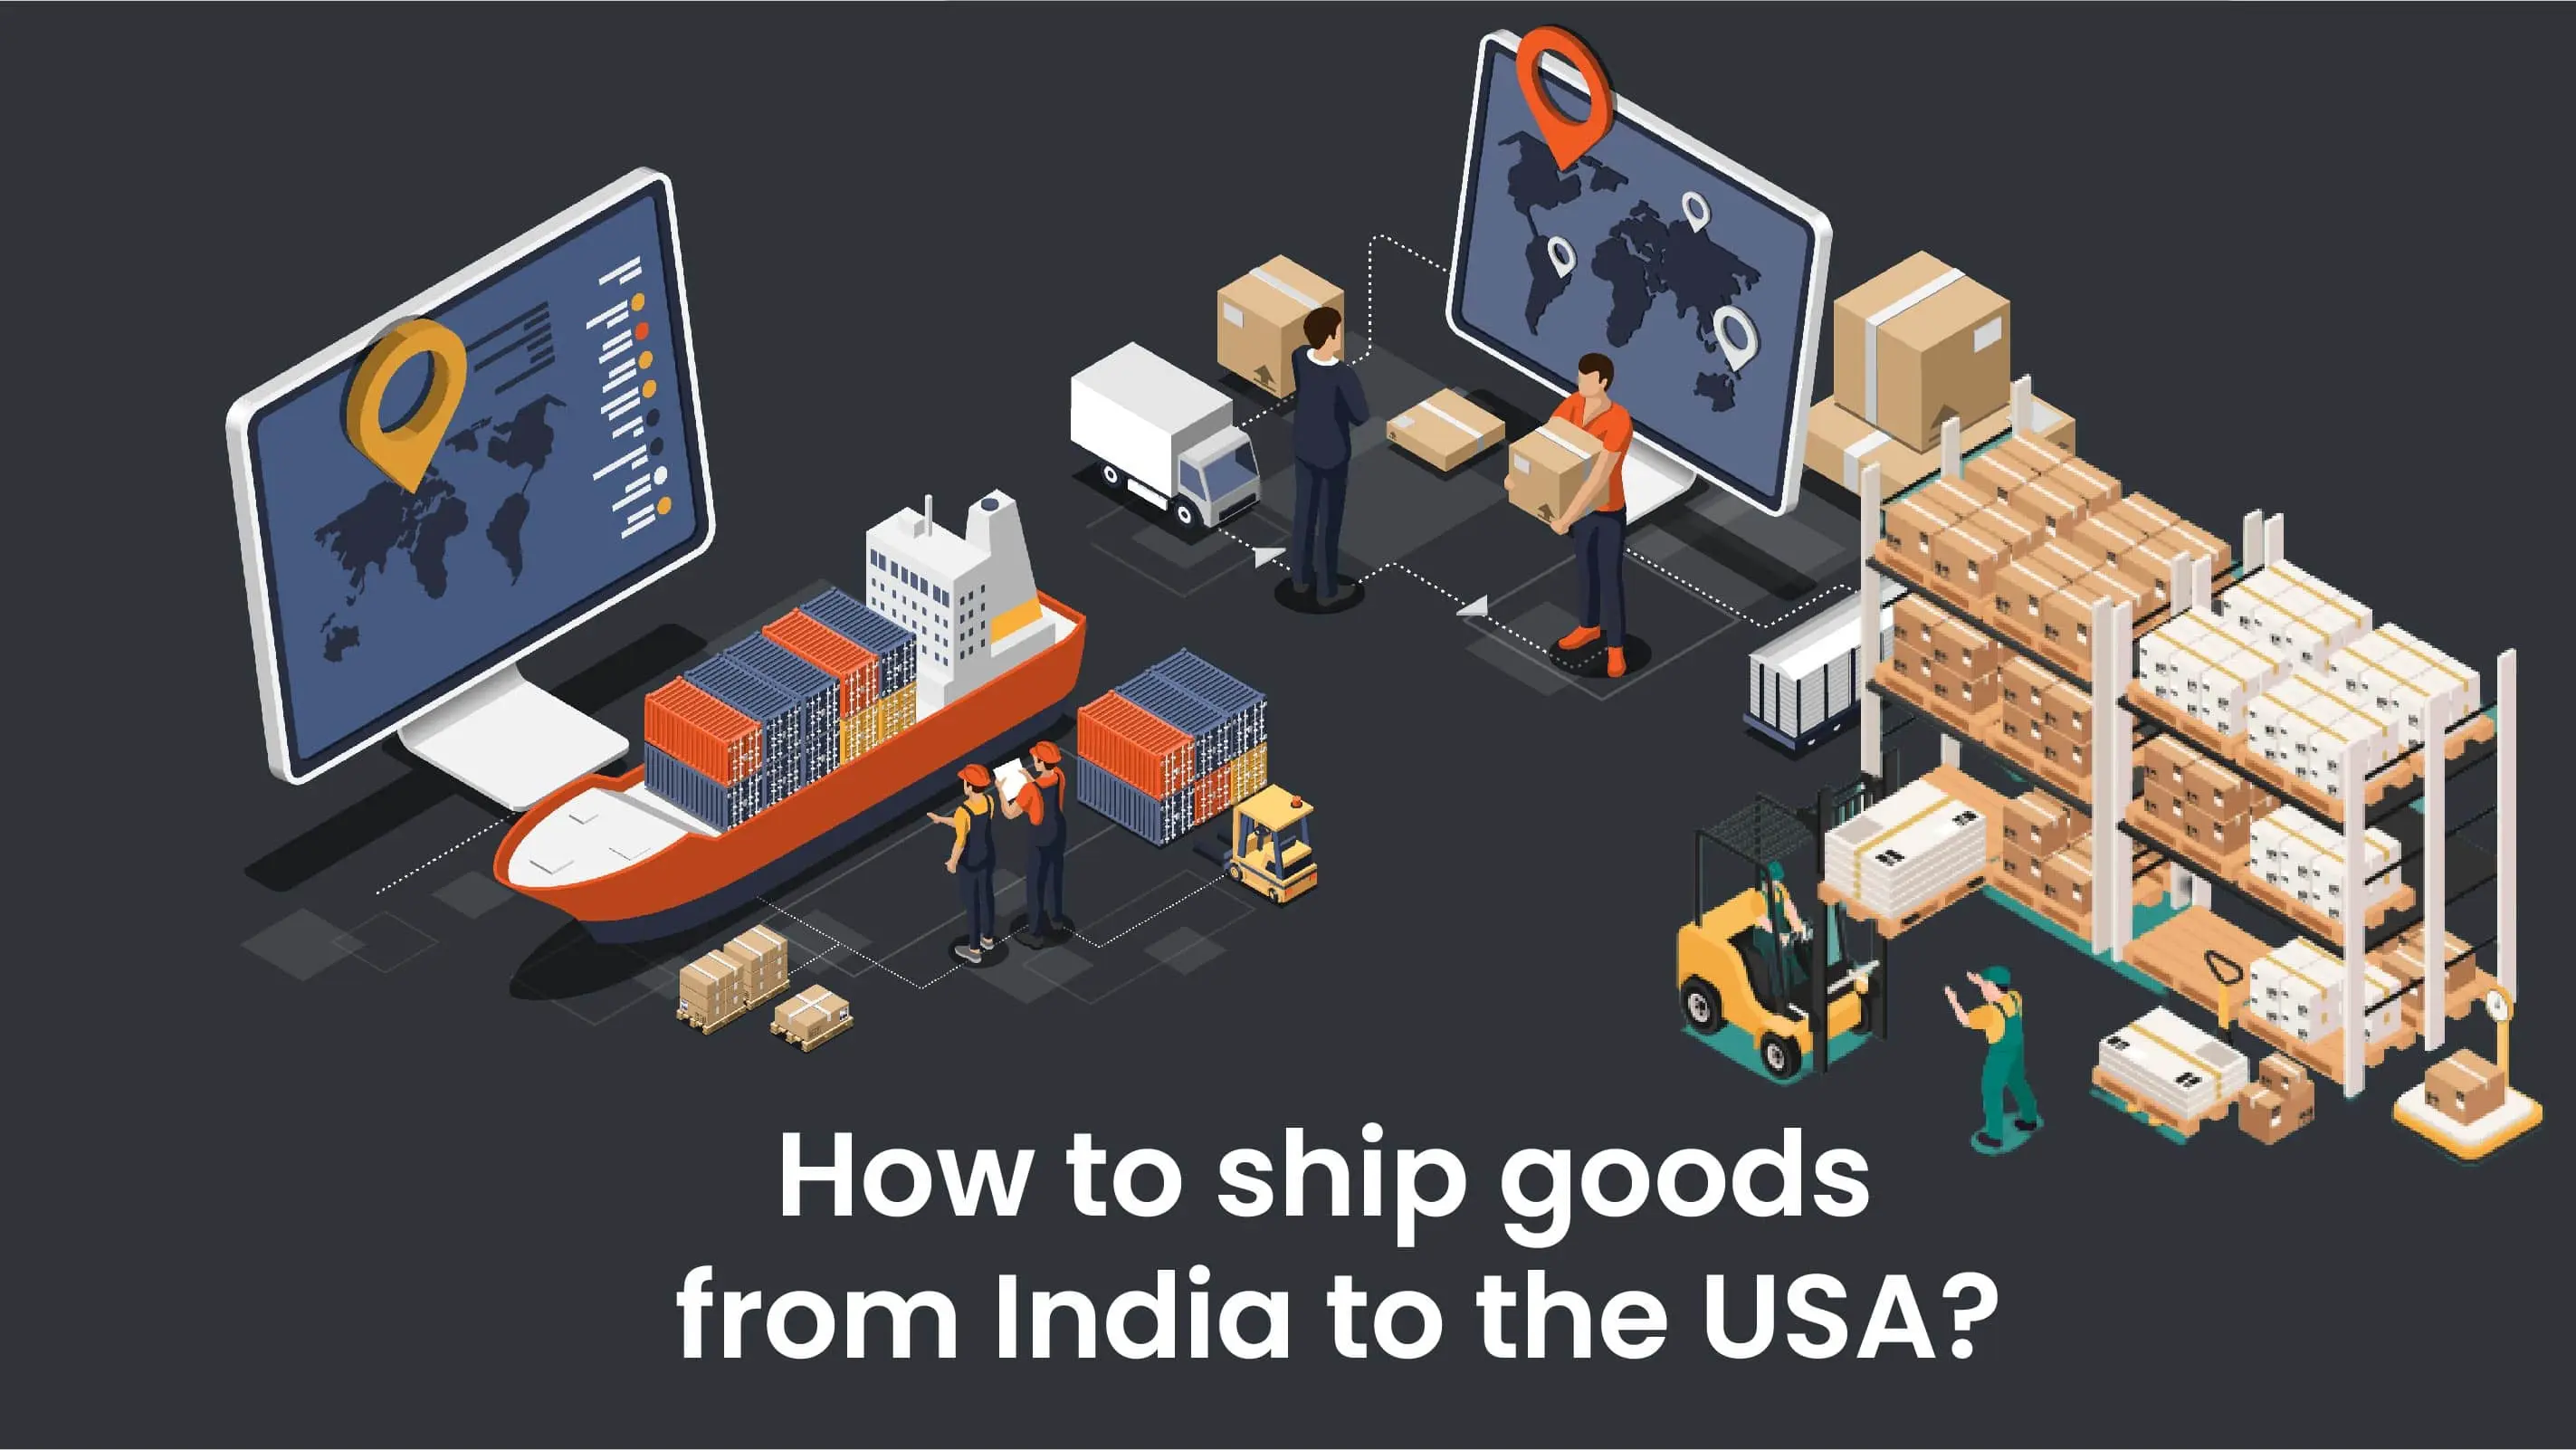 How to ship goods from India to USA